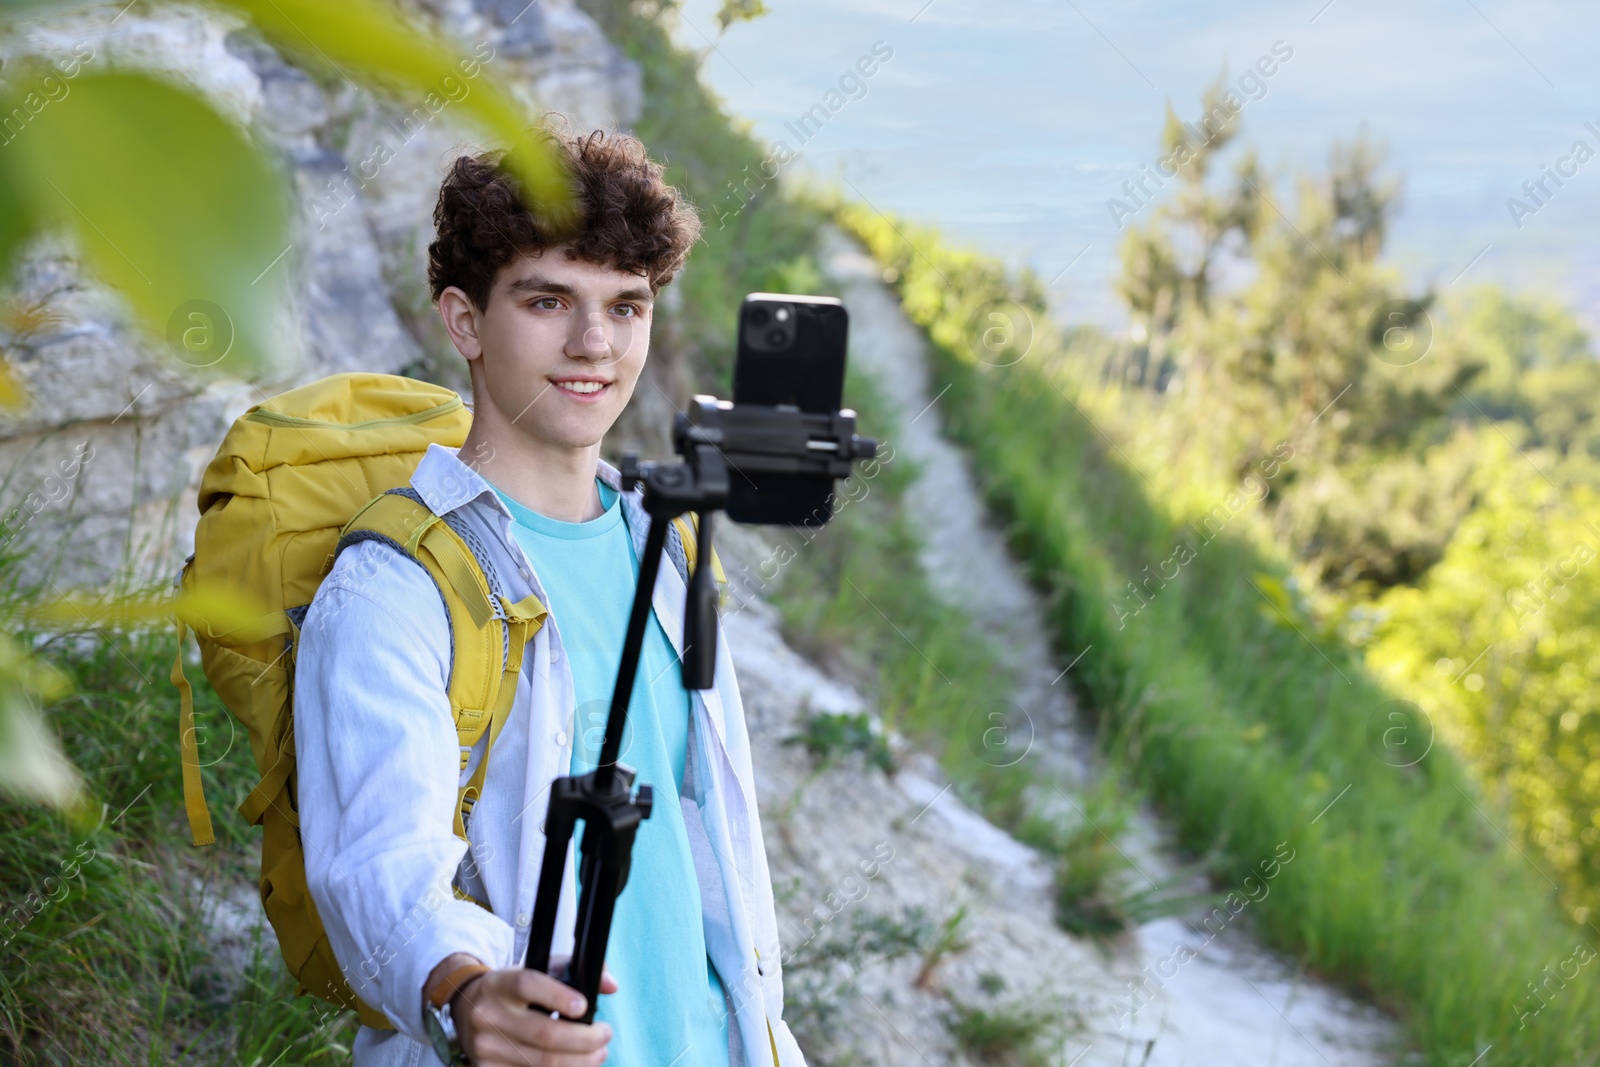 Photo of Travel blogger with smartphone and tripod recording video outdoors, space for text